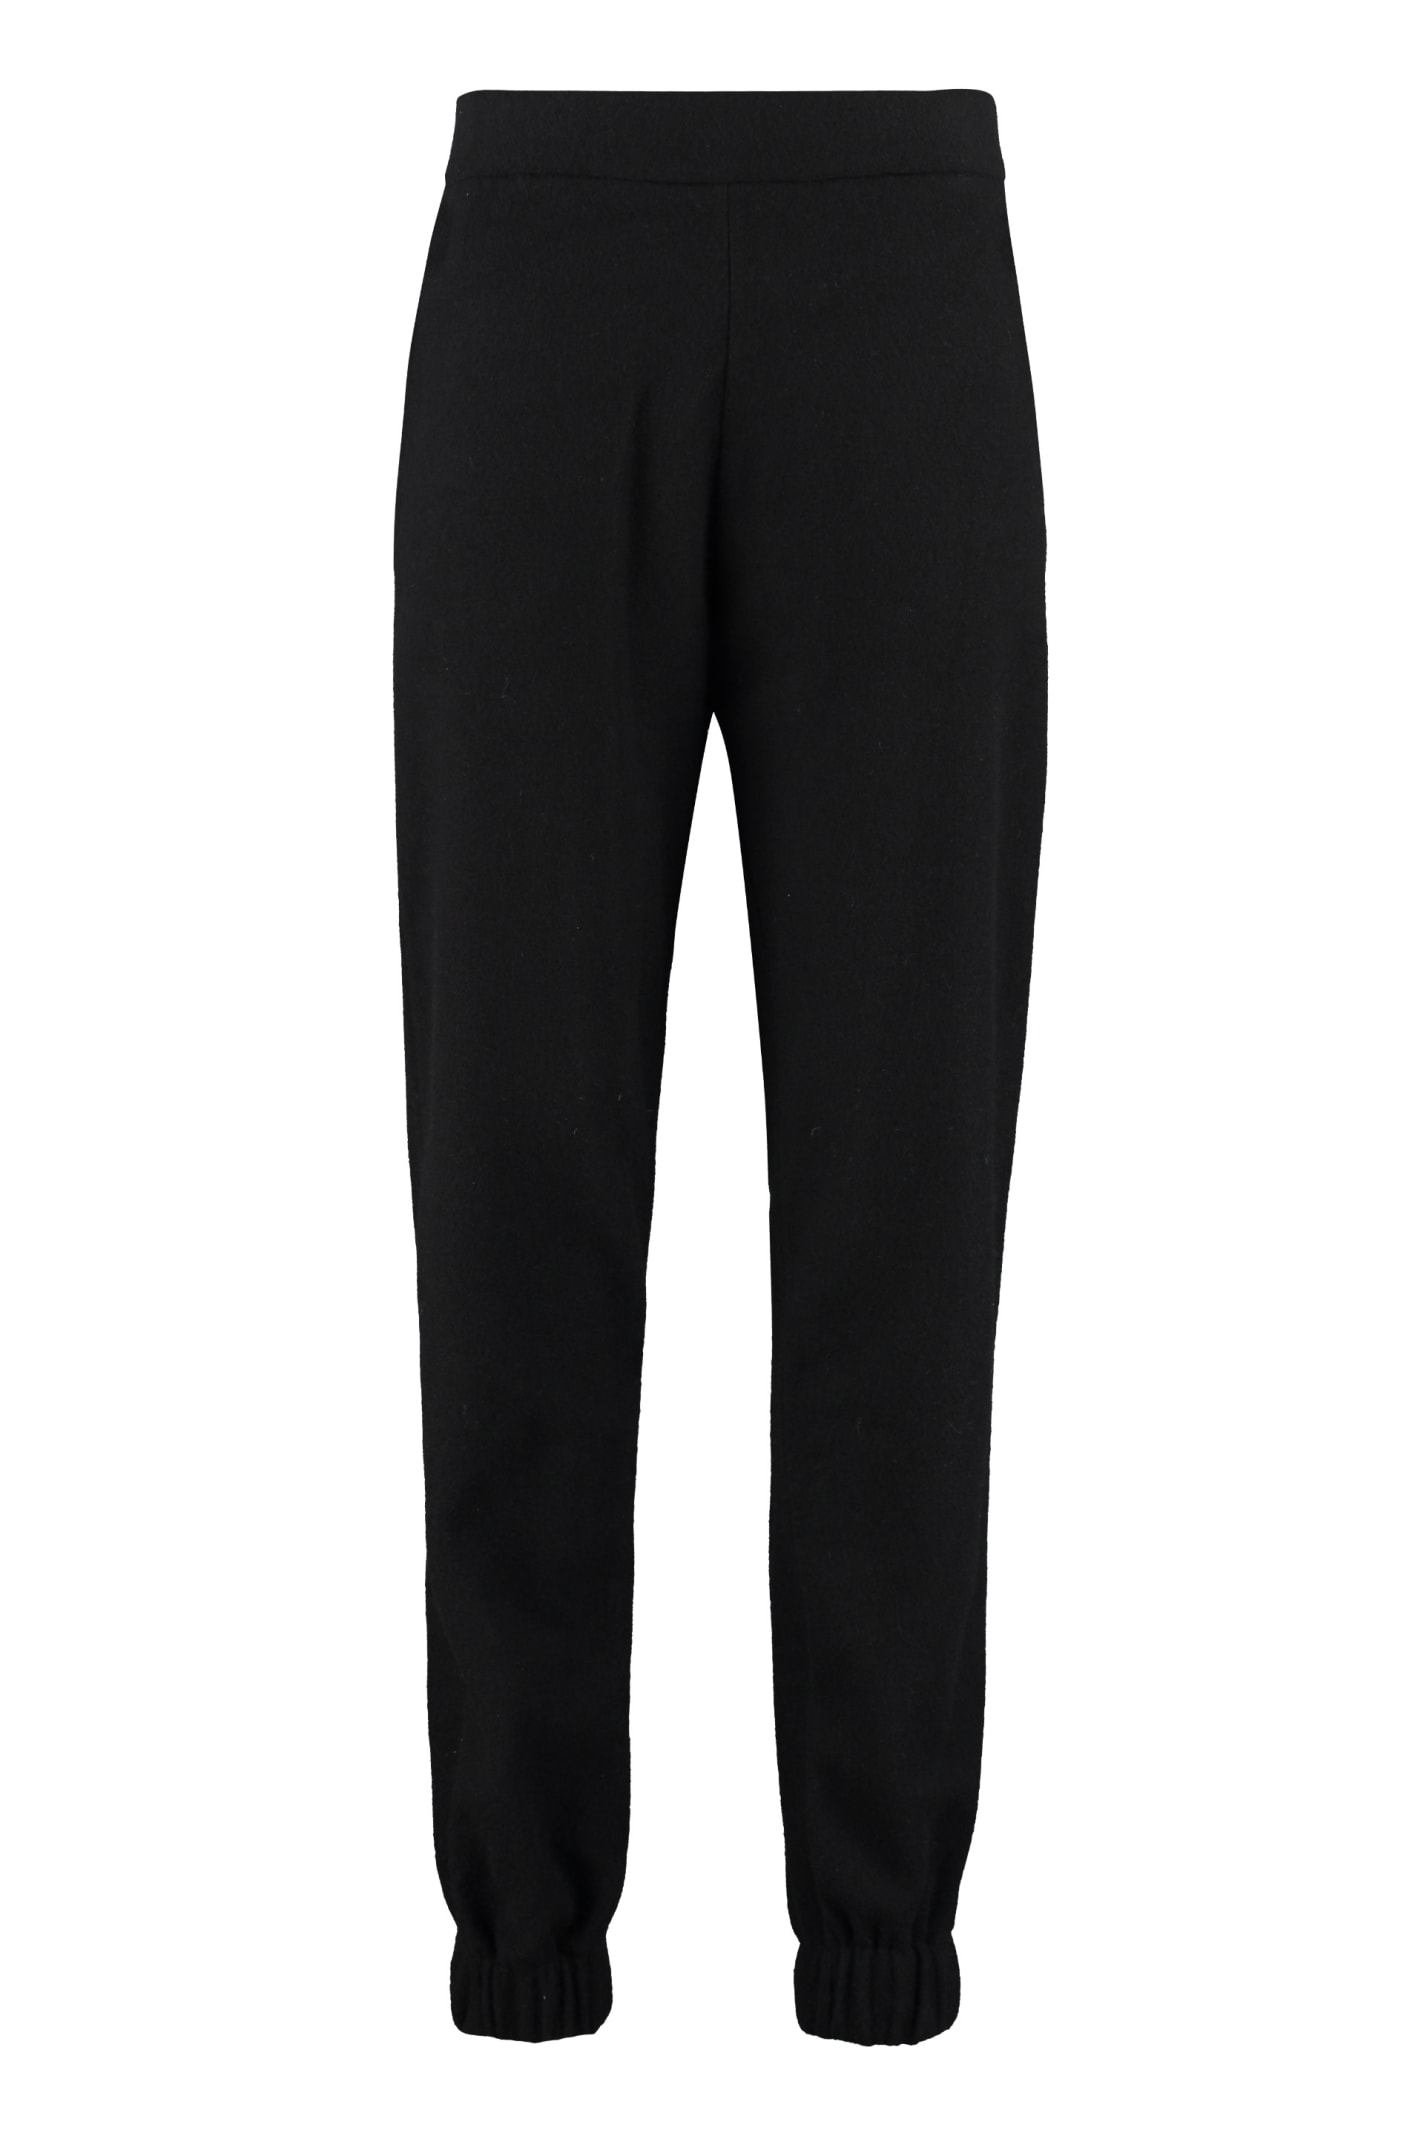 Canessa Cachemire Trousers